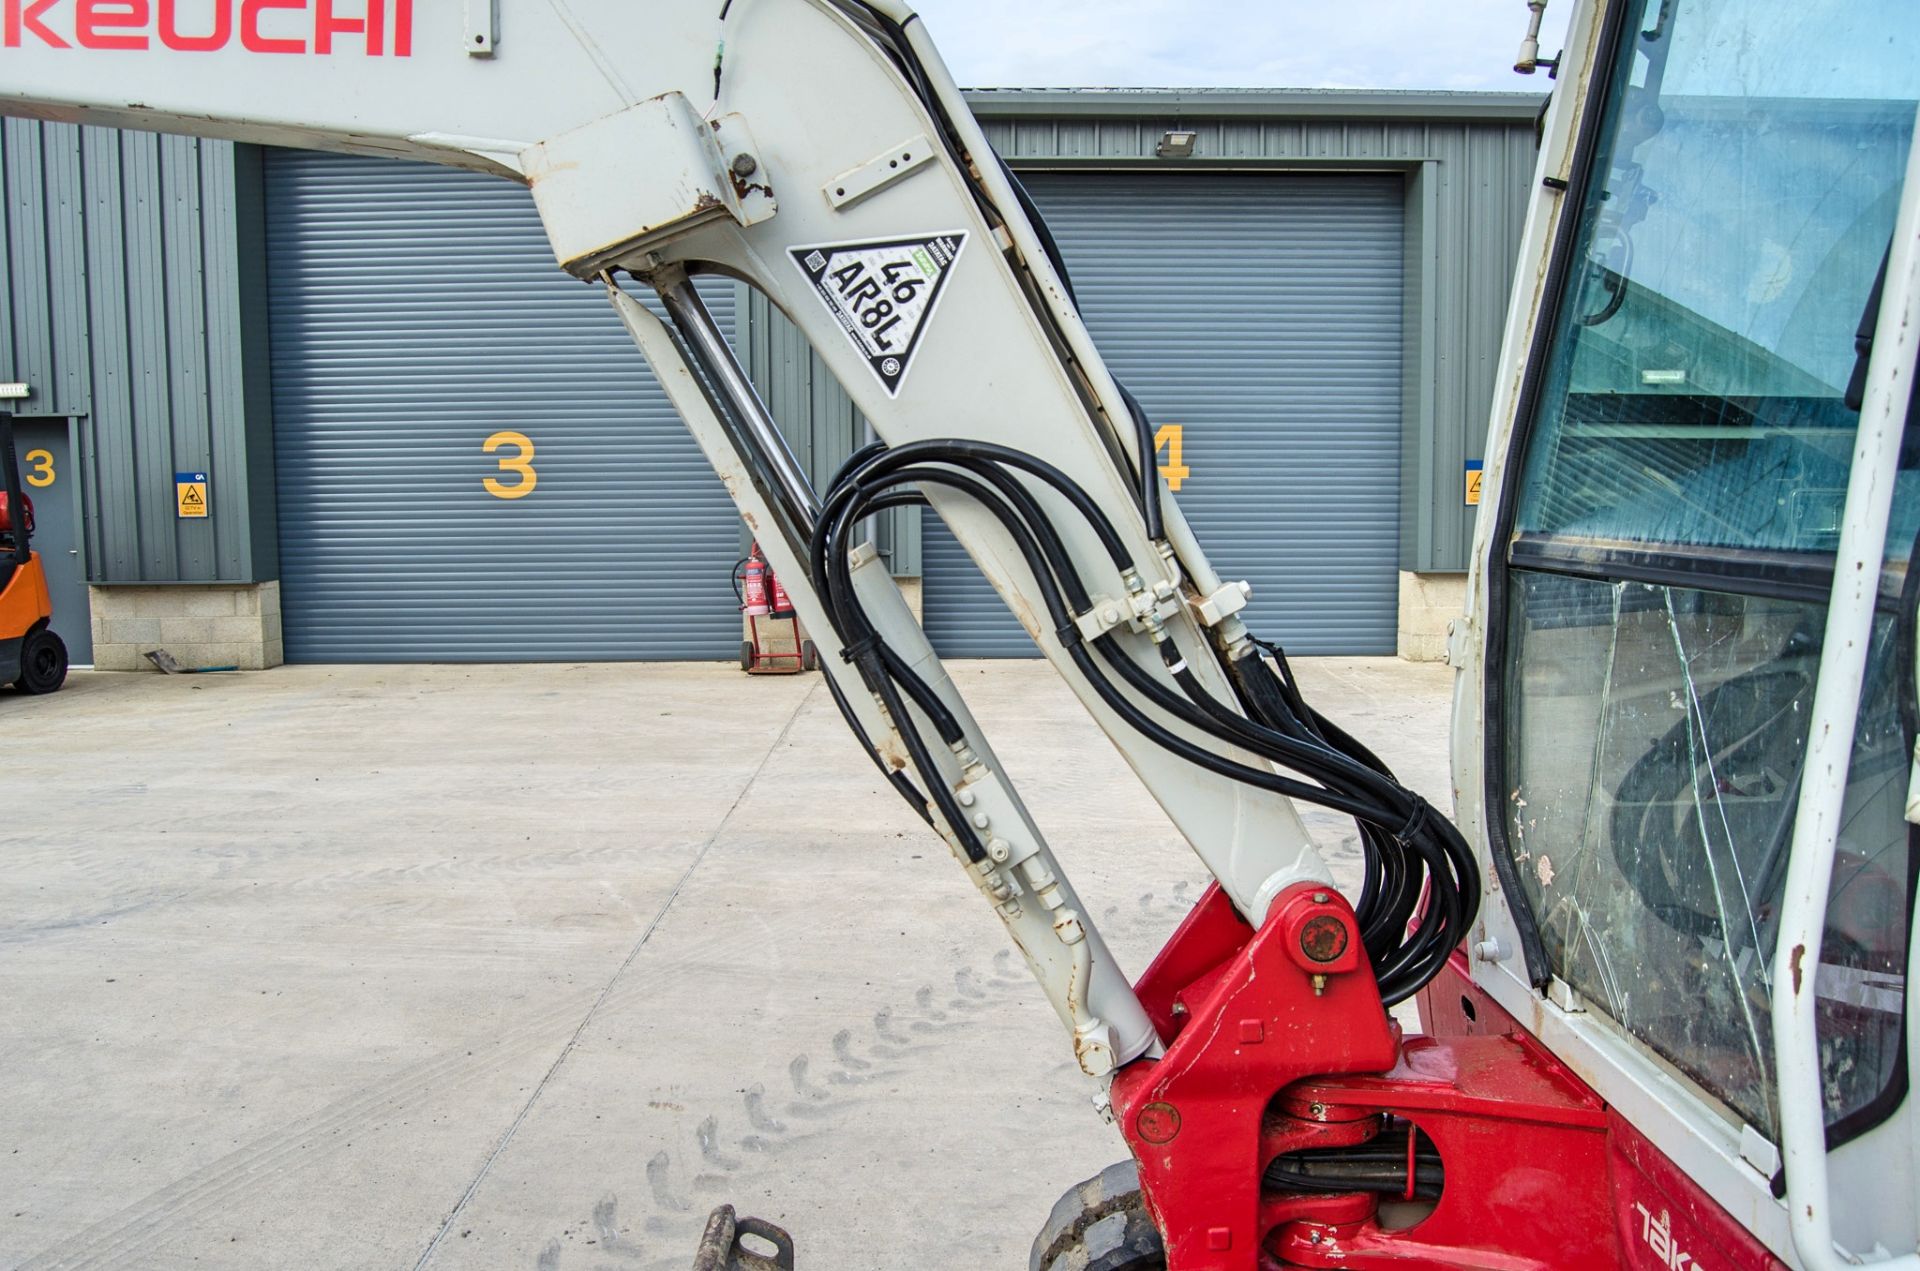 Takeuchi TB230 3 tonne rubber tracked excavator Year: 2018 S/N: 130003684 Recorded Hours: 2668 - Image 17 of 26